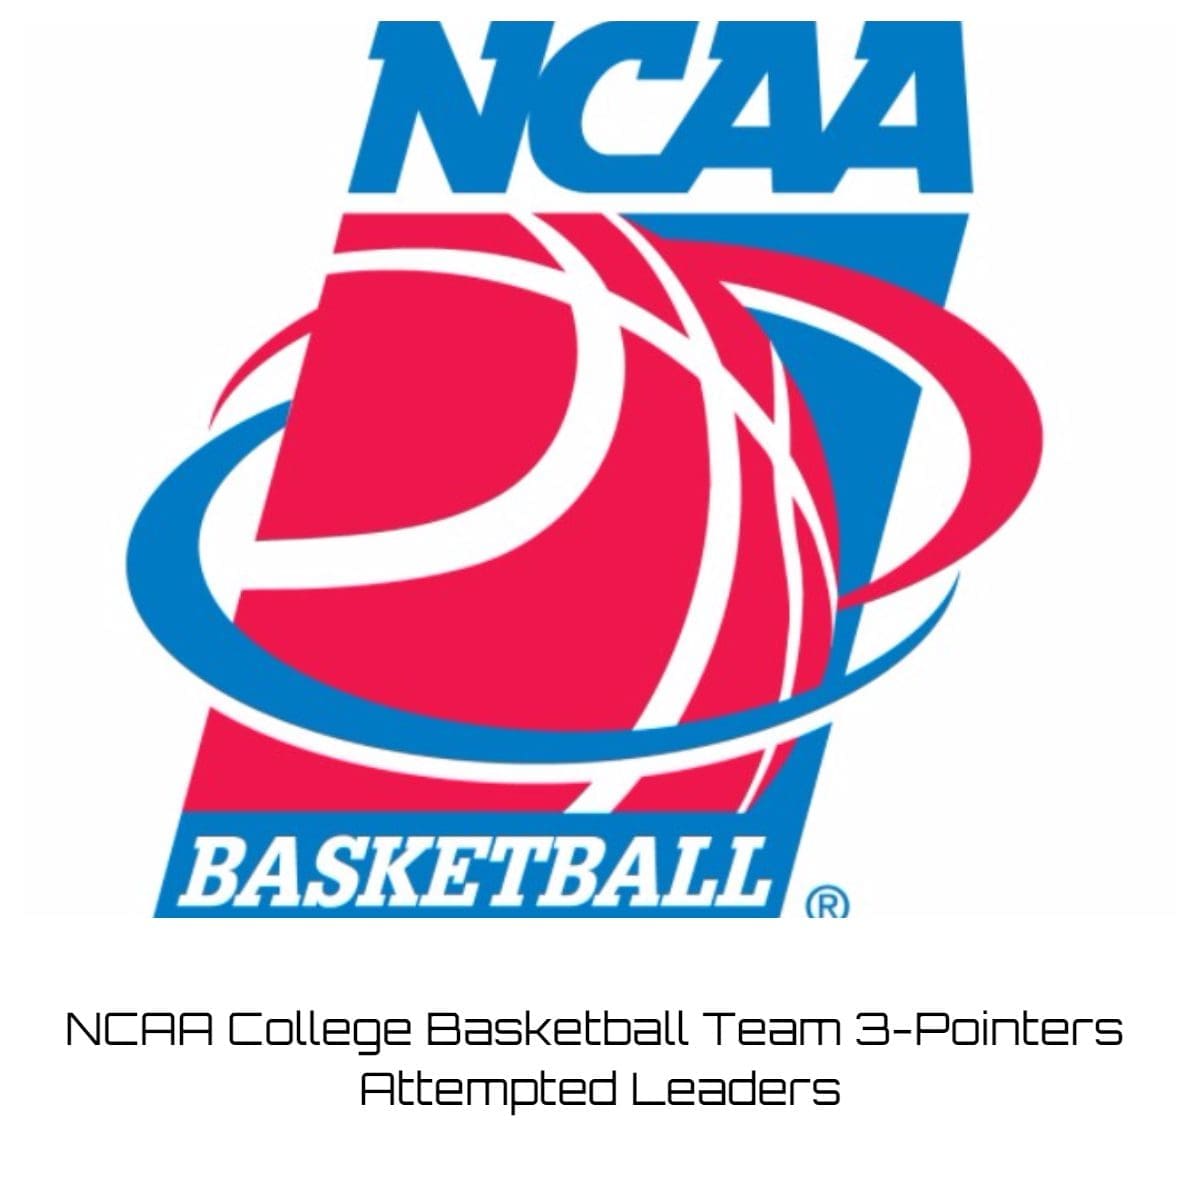 NCAA College Basketball Team 3-Pointers Attempted Leaders